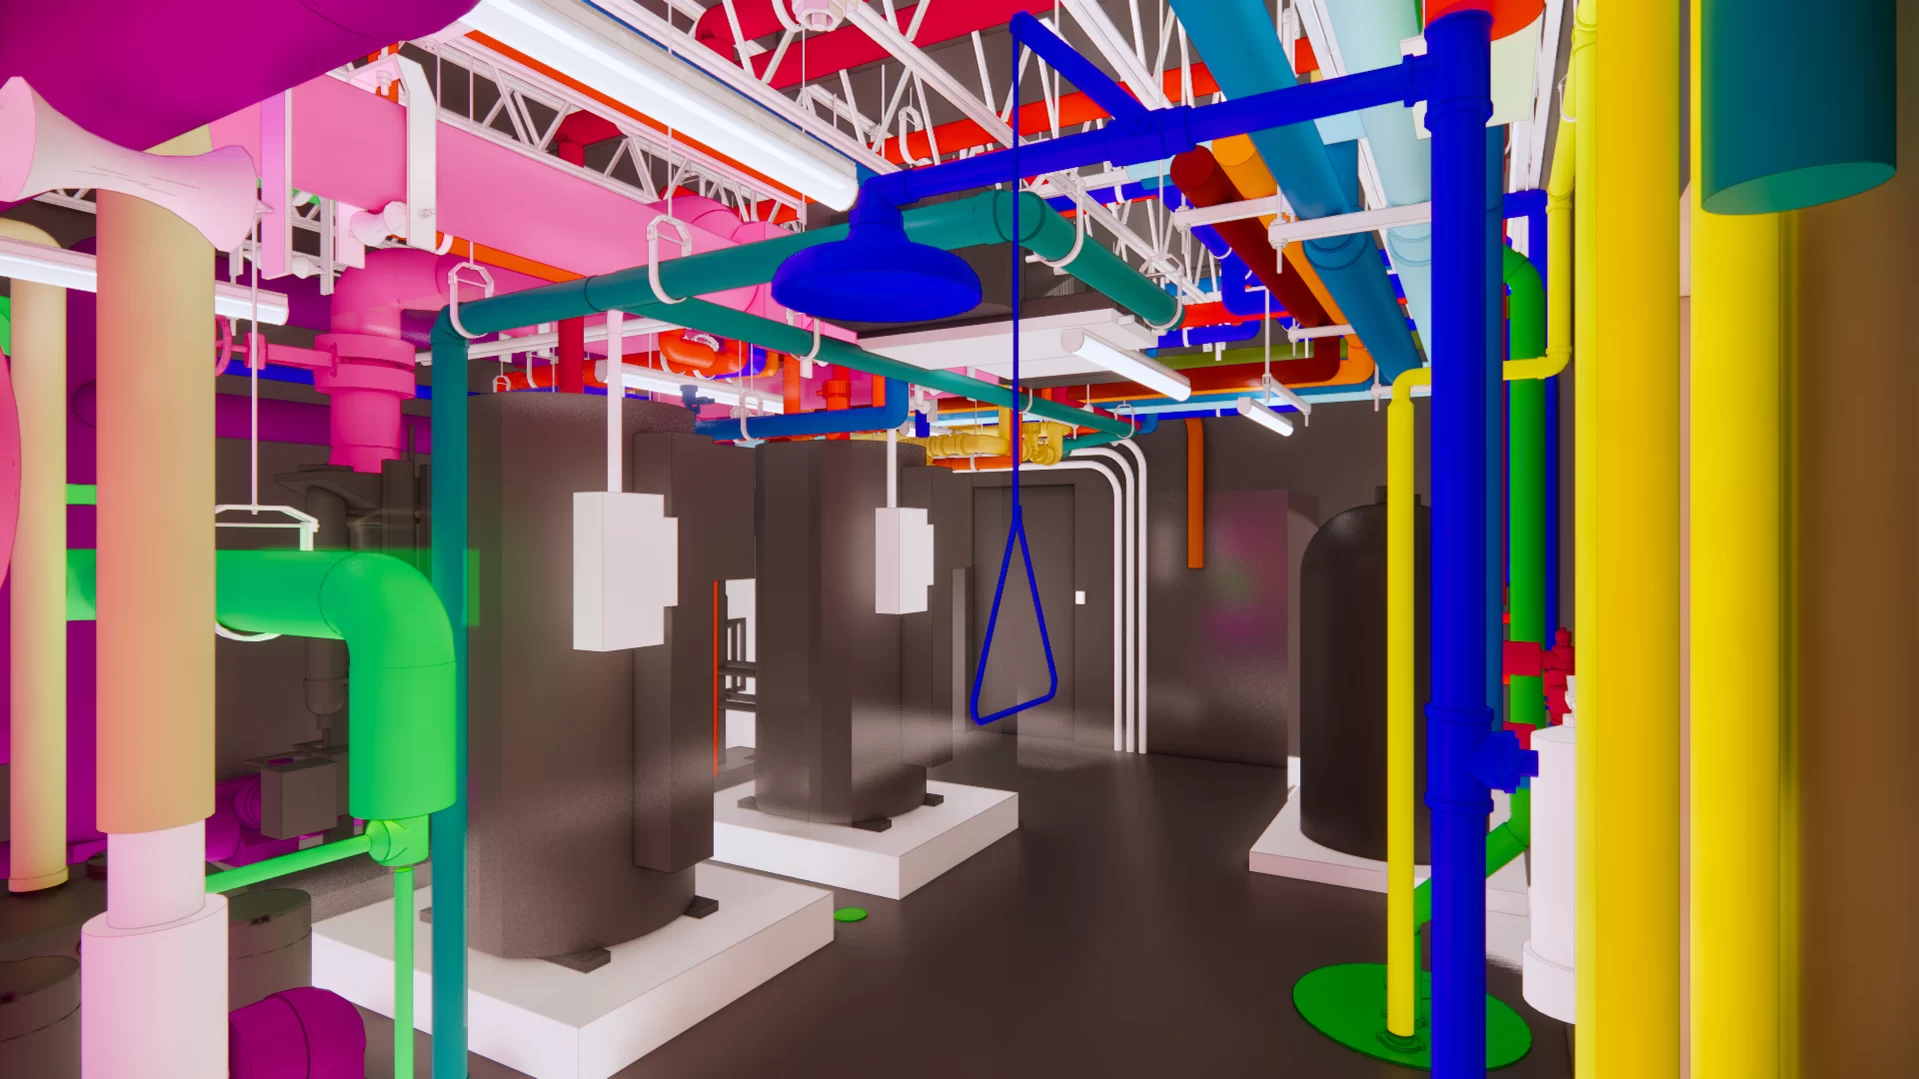 We've written previously about the 3-D computer models used to guide the actual work of building construction or renovation. This rendering depicts a variety of utility connections in the basement of Dana Chem. (Courtesy of Consigli Construction)